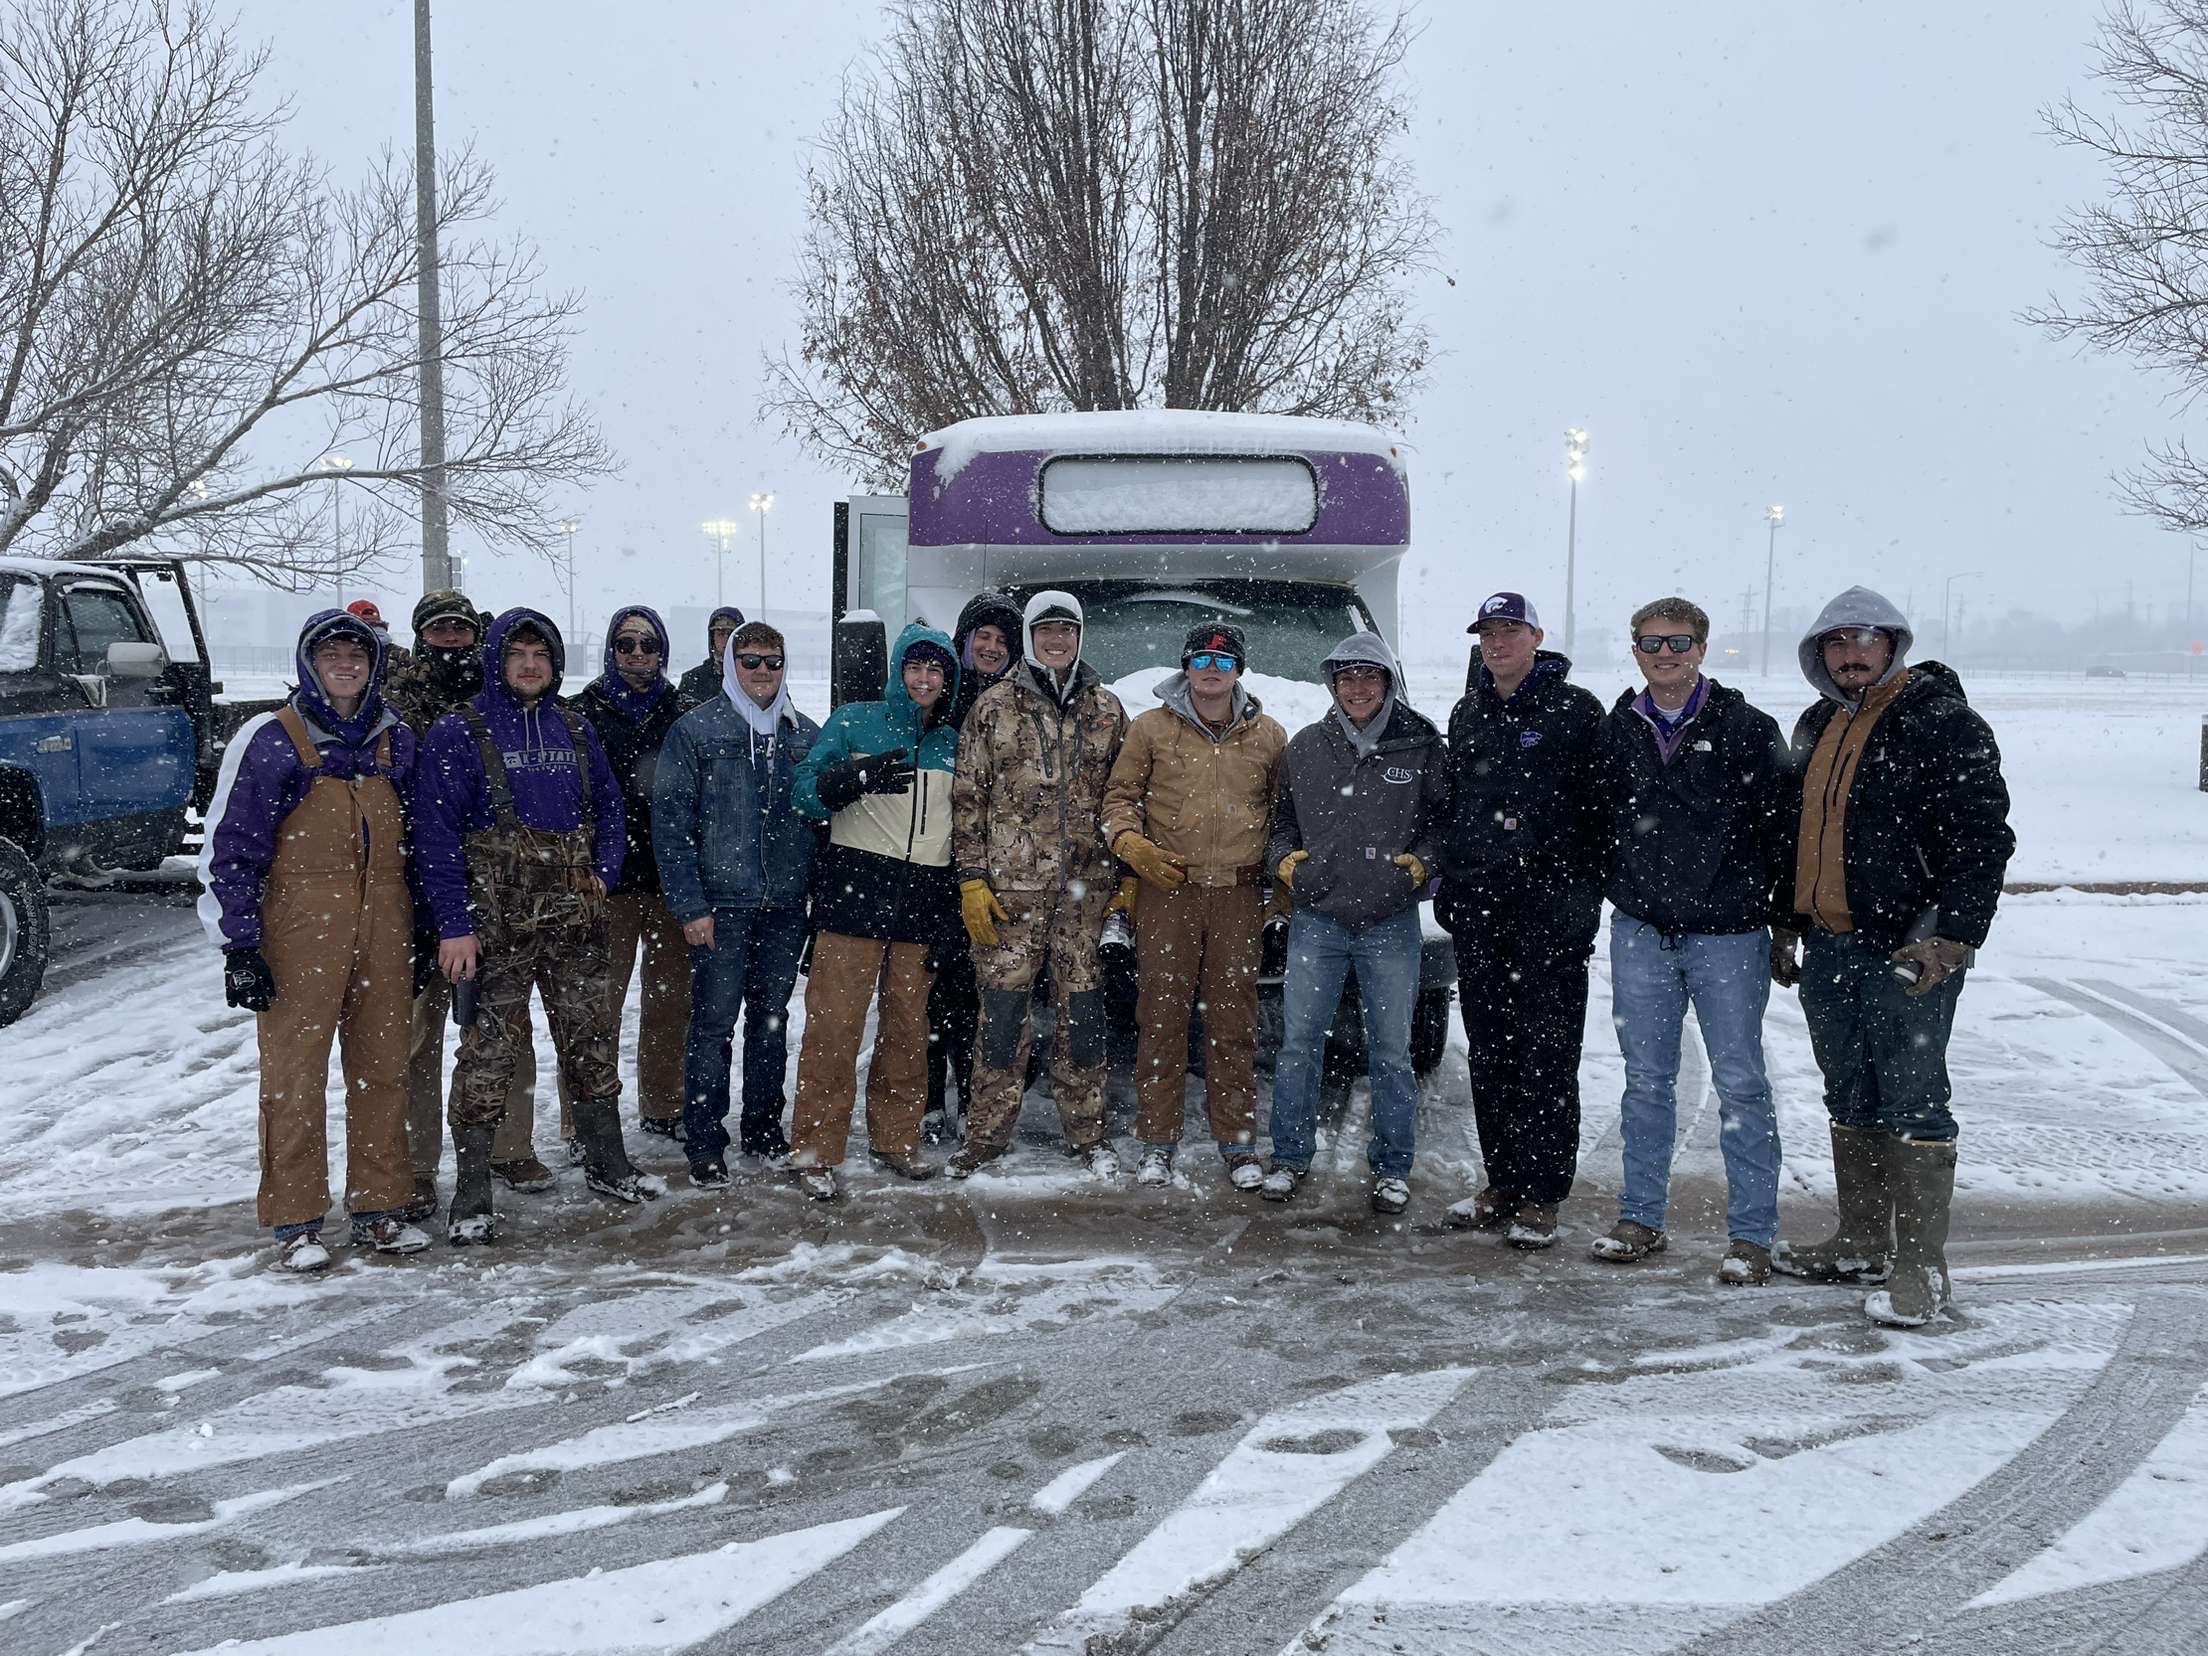 A snowstorm couldn't stop these Brothers and the Bus from arriving at Bill Snyder Family Stadium 5 hours before Kickoff!